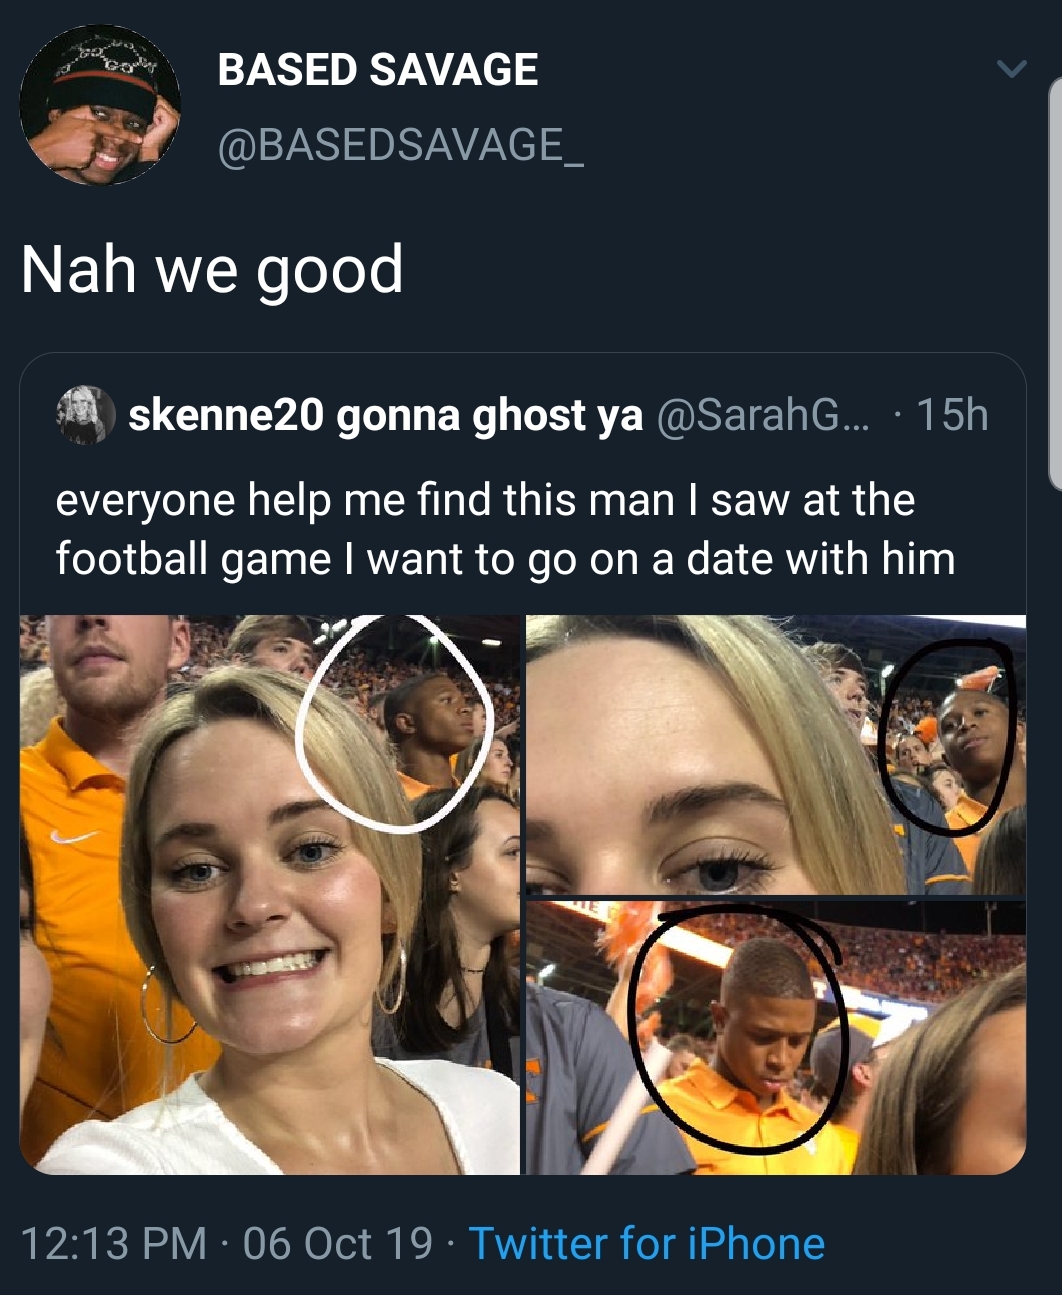 black twitter - Based Savage Nah we good skenne 20 gonna ghost ya ... 15h everyone help me find this man I saw at the football game I want to go on a date with him 06 Oct 19. Twitter for iPhone